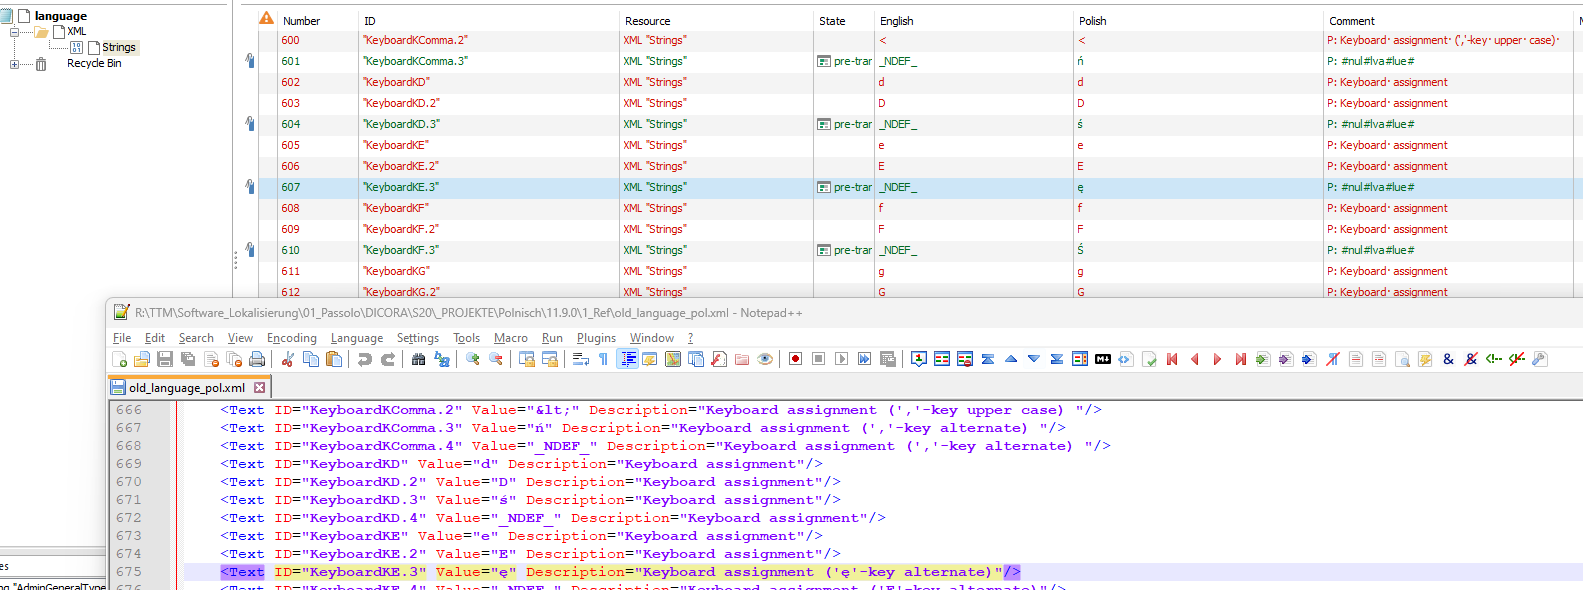 Screenshot of Trados Studio software showing an XML file with English source strings and their corresponding Polish translations for keyboard labels. Some strings have pre-translation comments indicating the need for alternate Polish characters for certain keys.